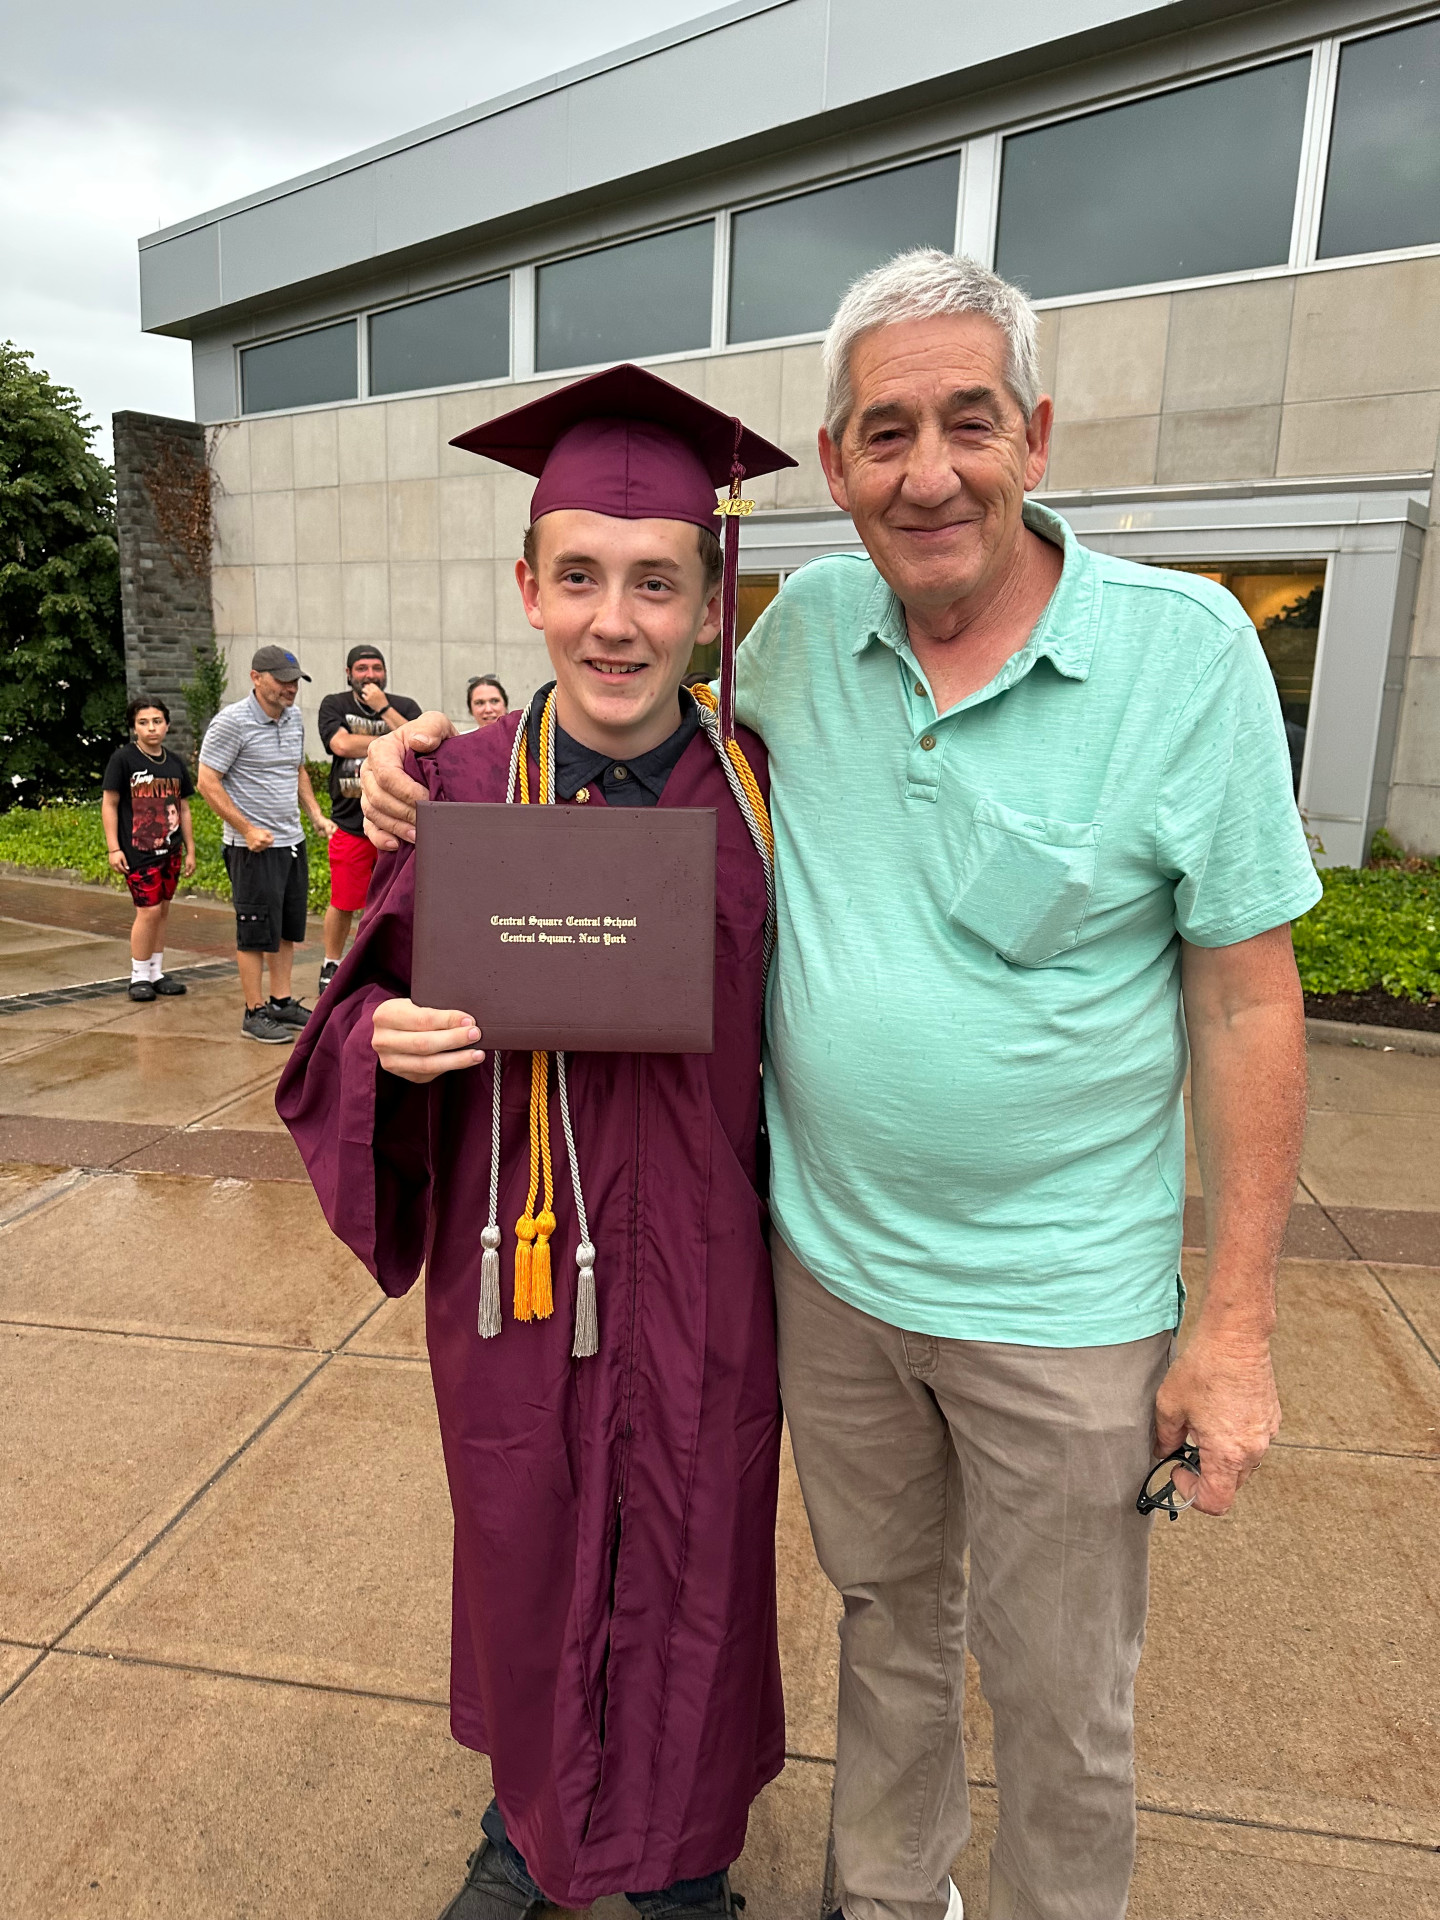 High school graduate and dad